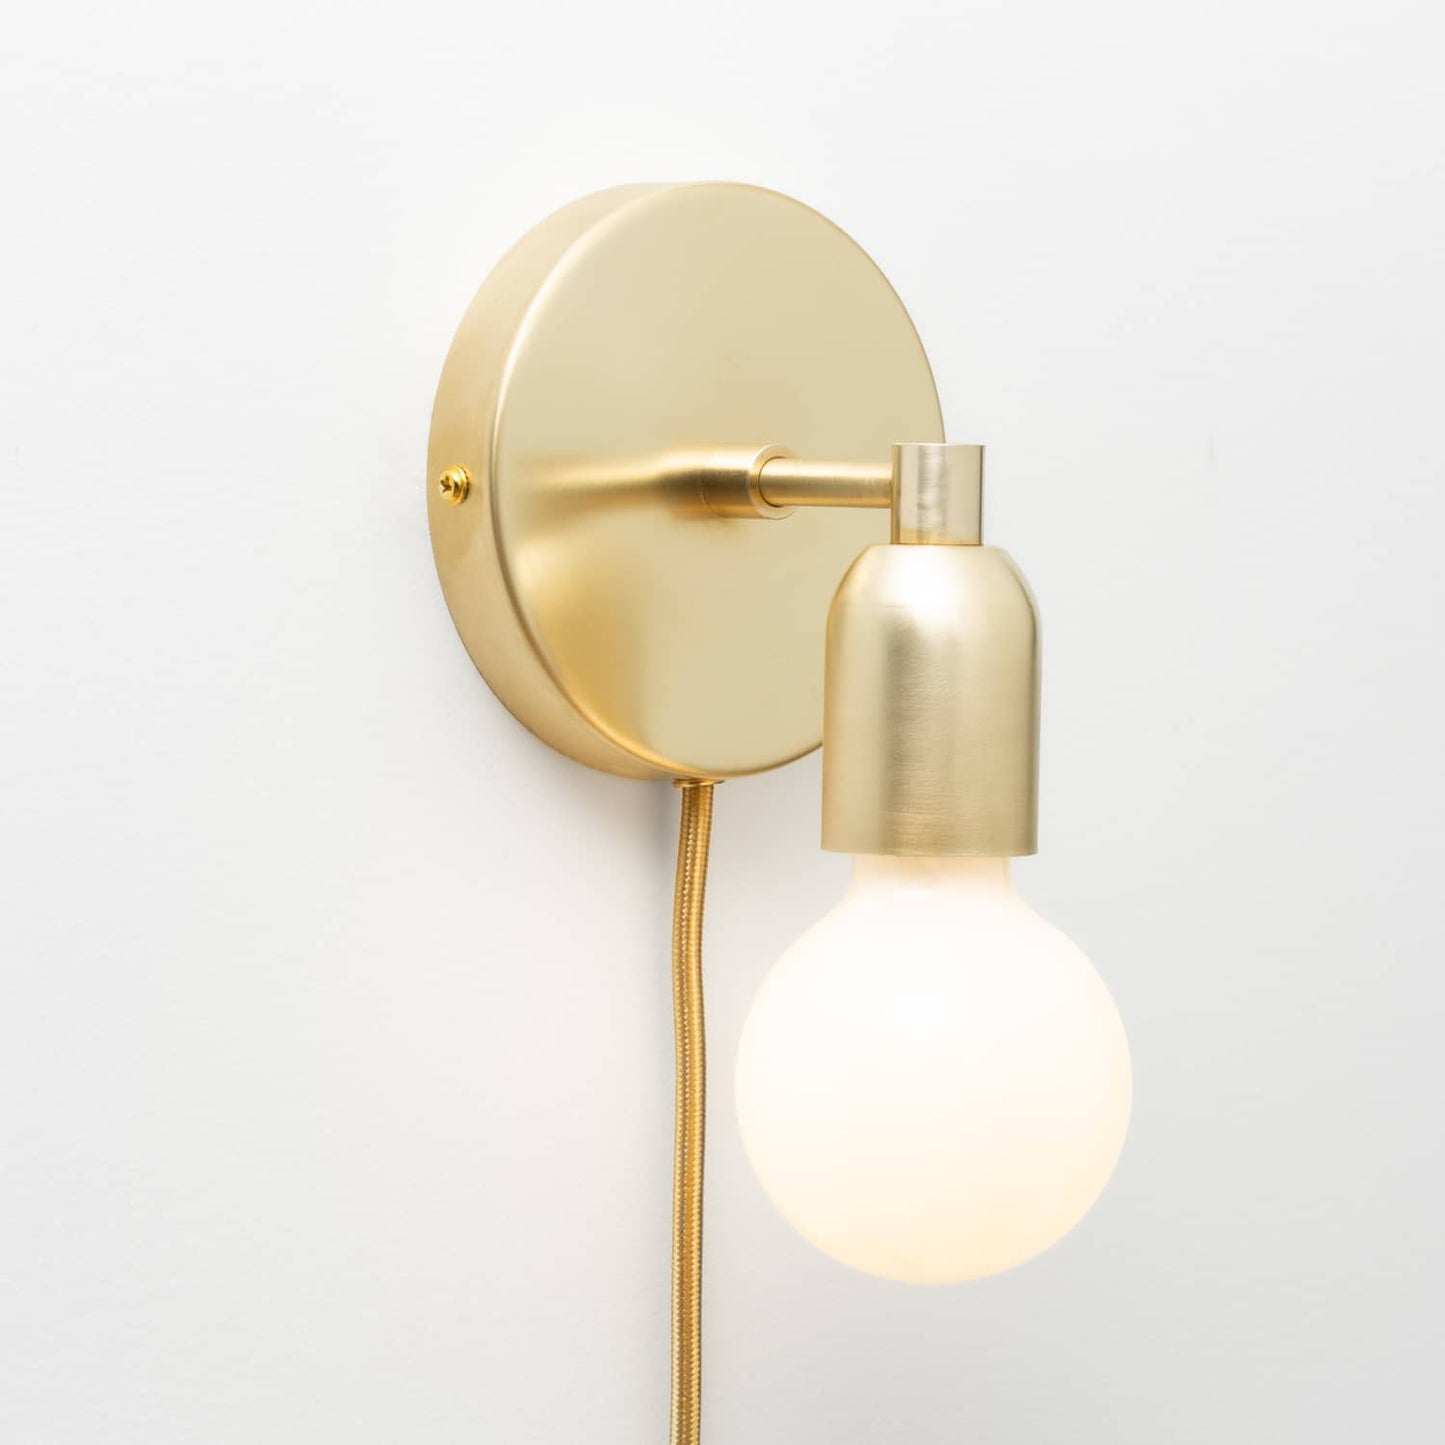 Junction Mini Solo Plug-In Sconce in Raw Brass finish pictured with G25 light bulb